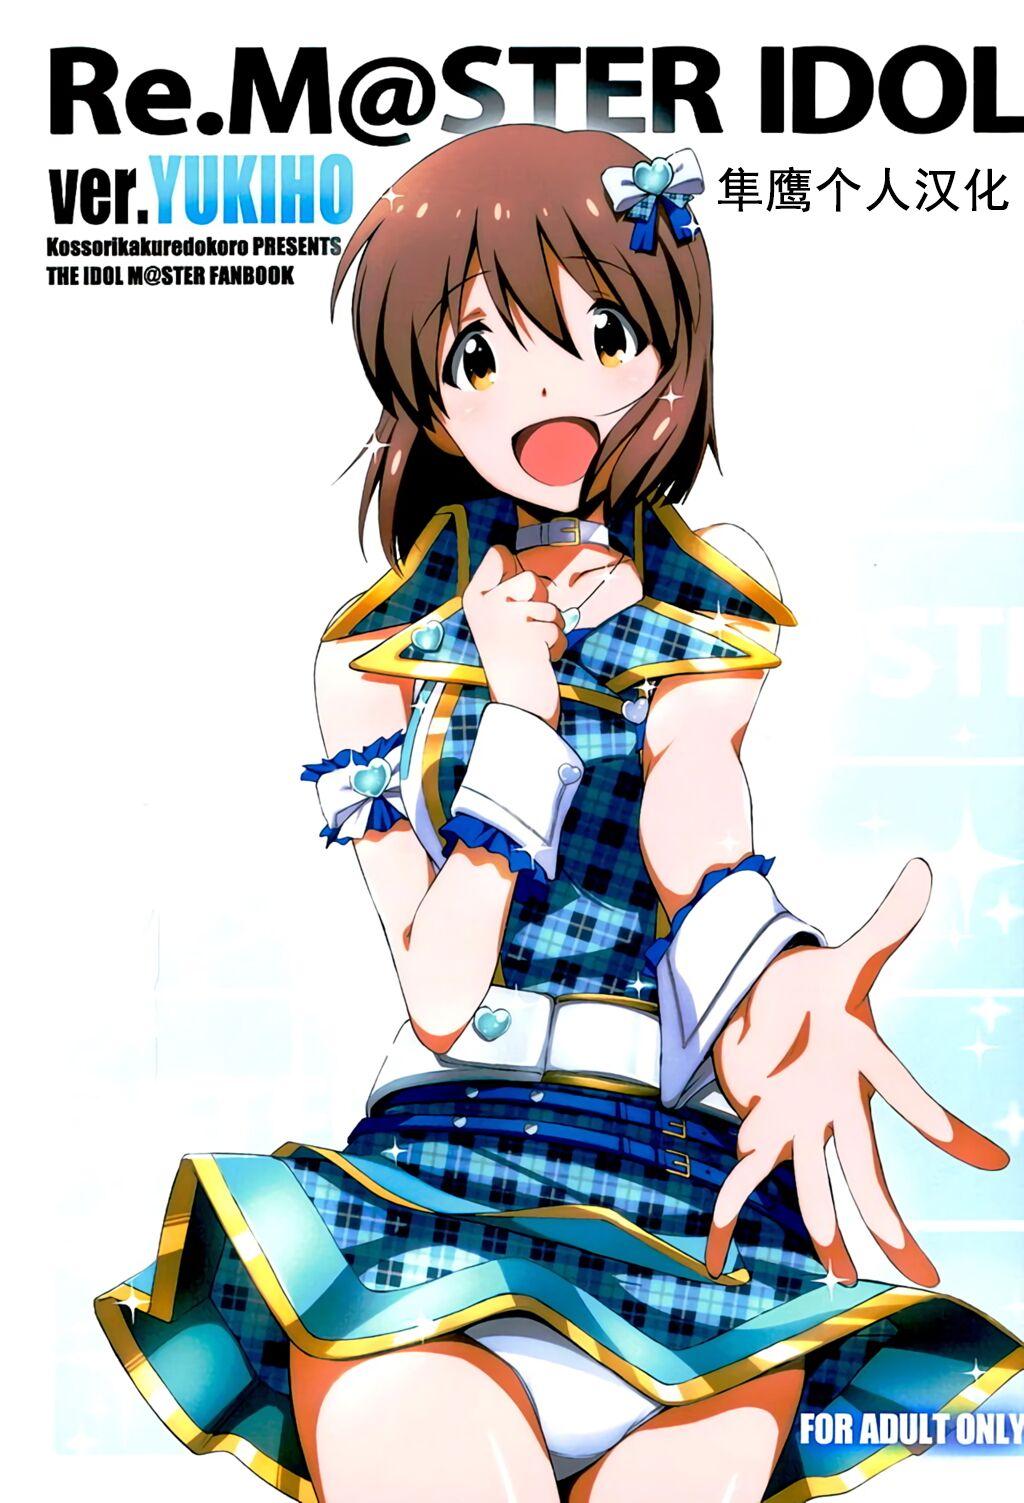 Jerkoff Re:M@STER IDOL ver.YUKIHO - The idolmaster Slutty - Page 1